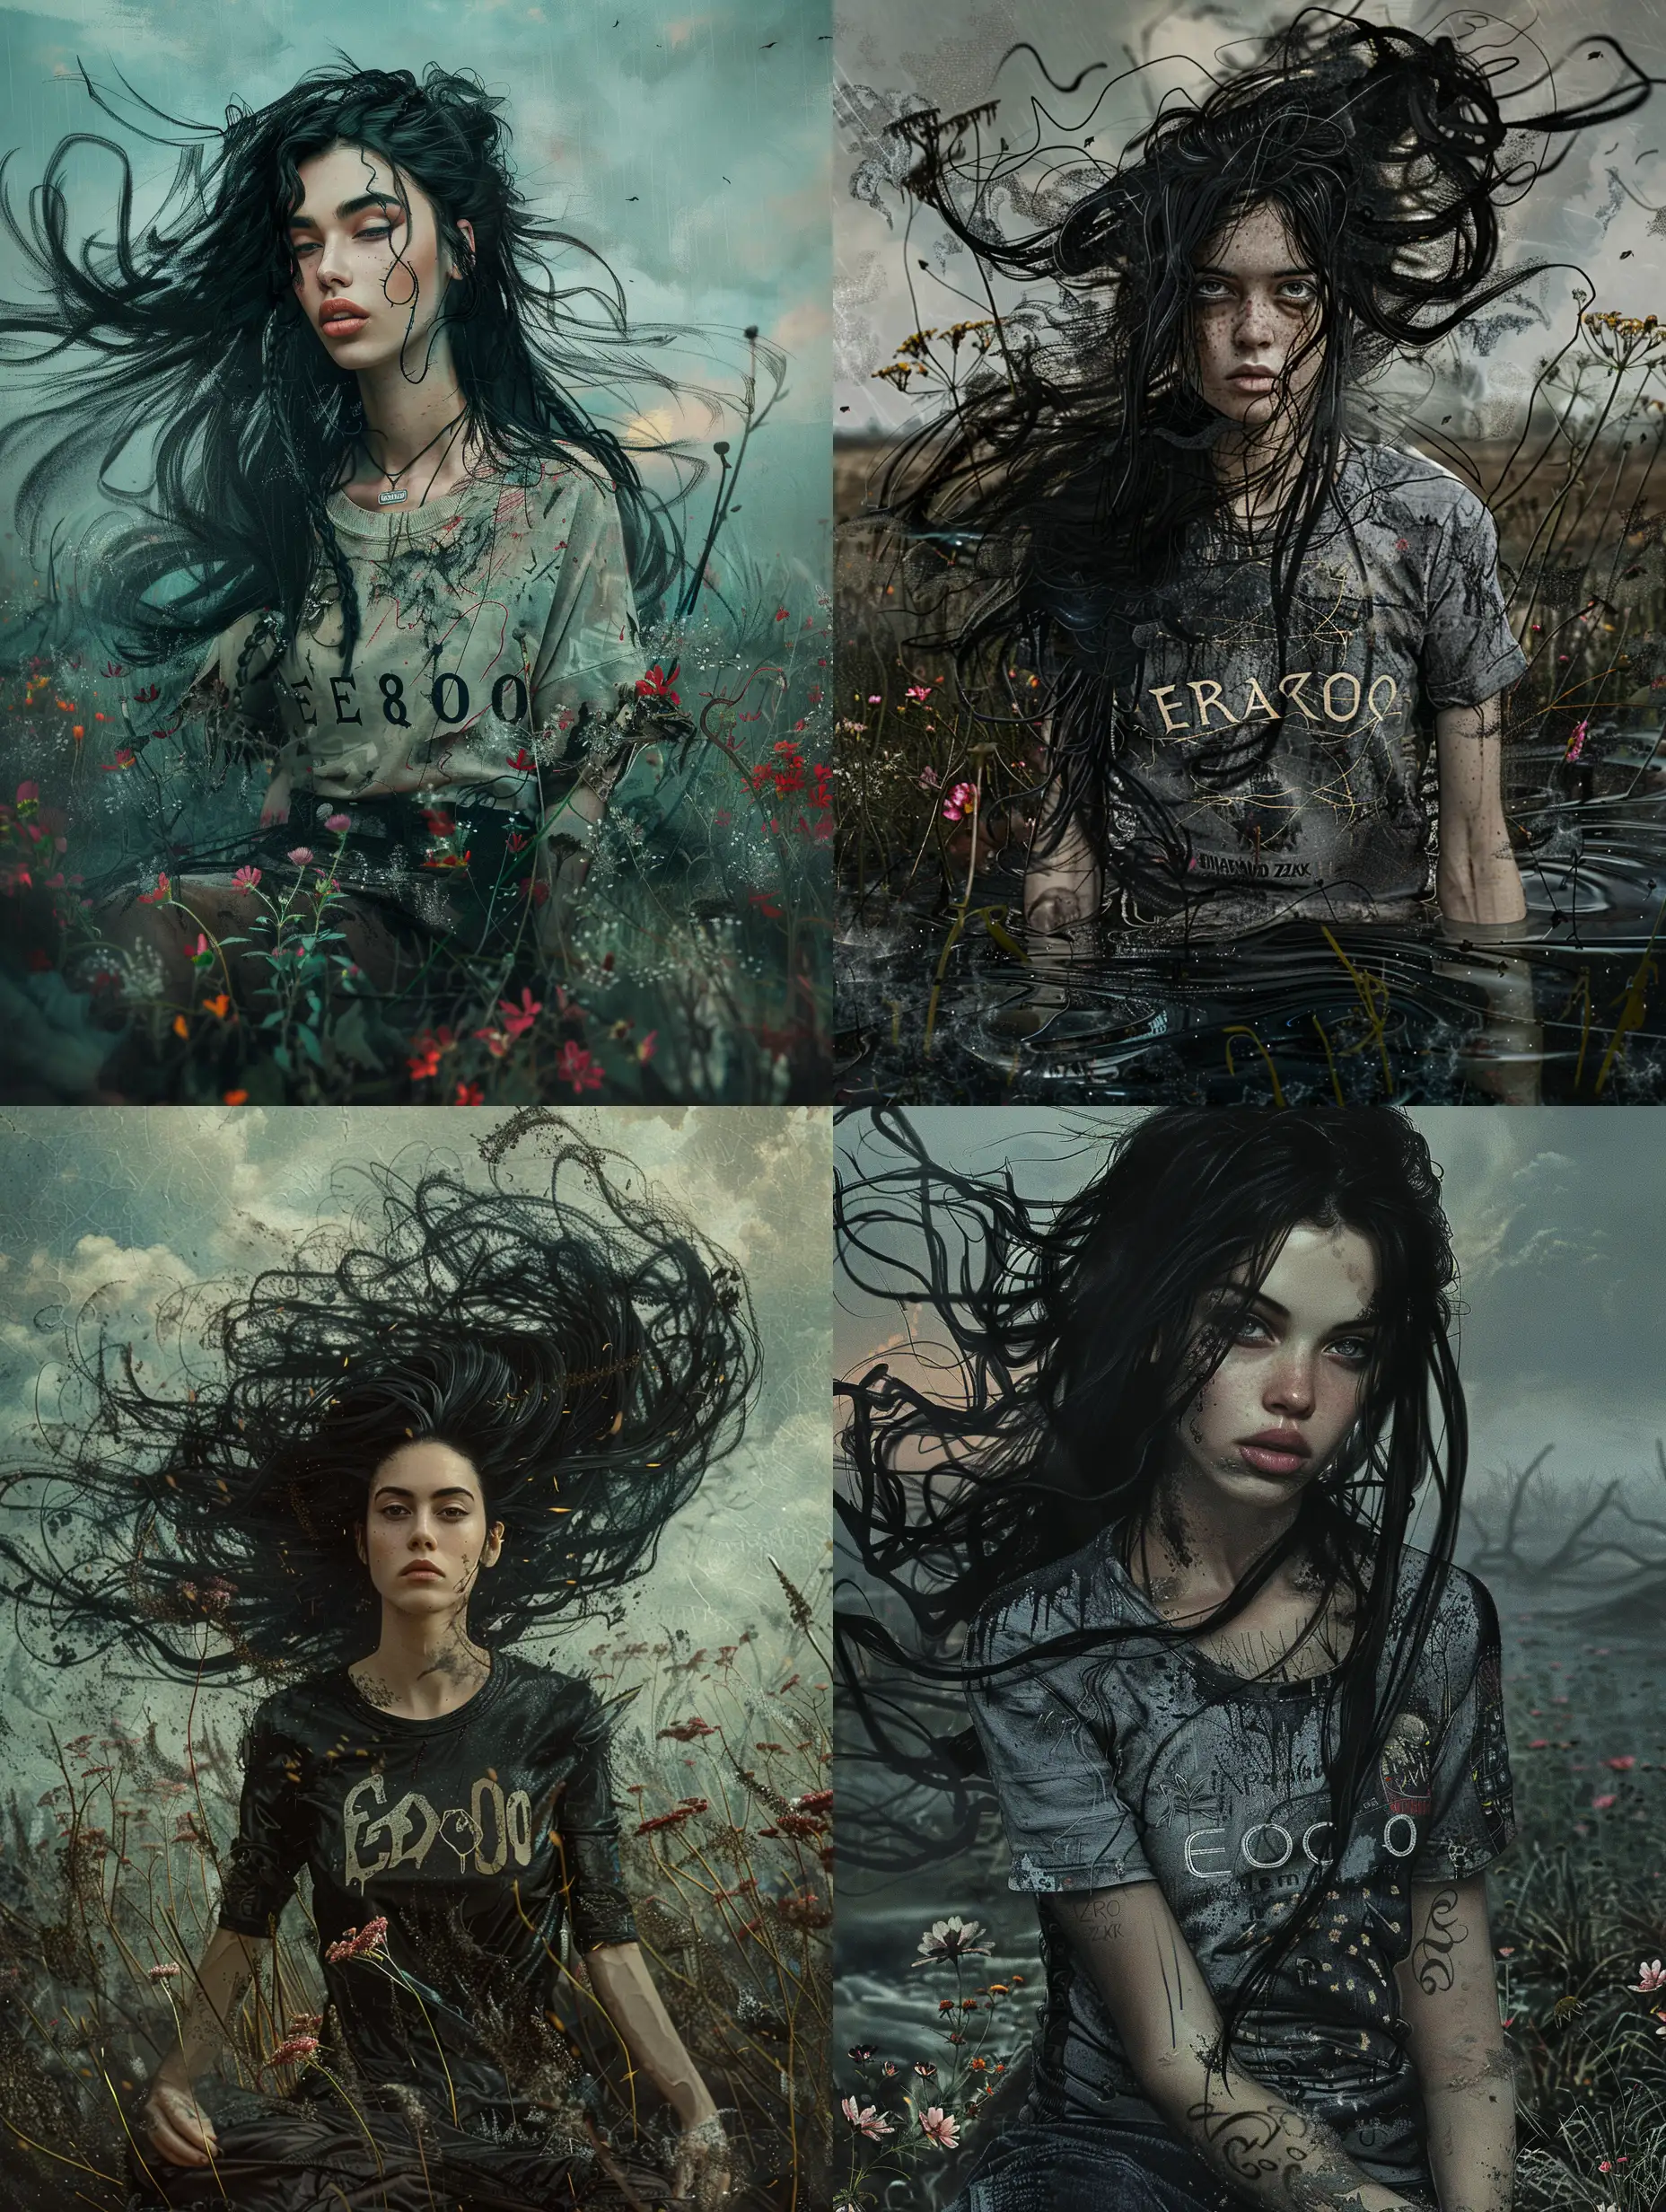 Surreal-Woman-with-Windy-Hair-Amidst-Flowers-in-Apocalyptic-Landscape